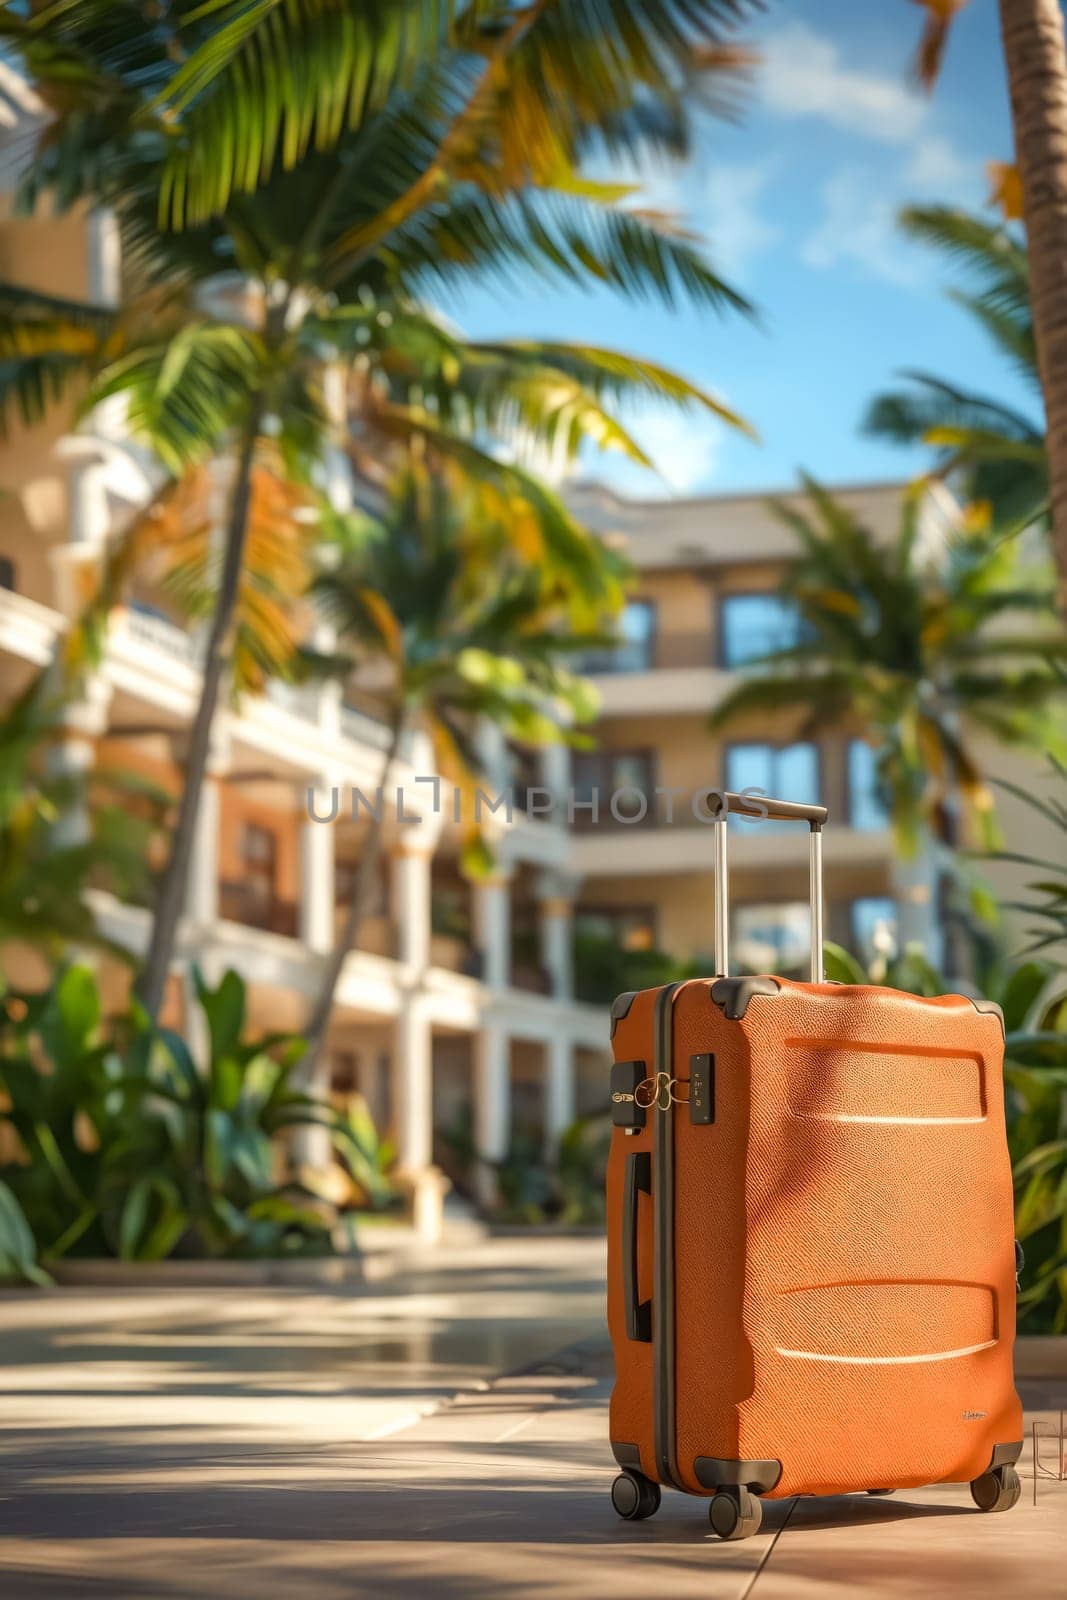 A large orange suitcase is sitting on the ground in front of a building. The suitcase is open and the handle is visible. The scene is set in a tropical location, with palm trees in the background. Generative AI